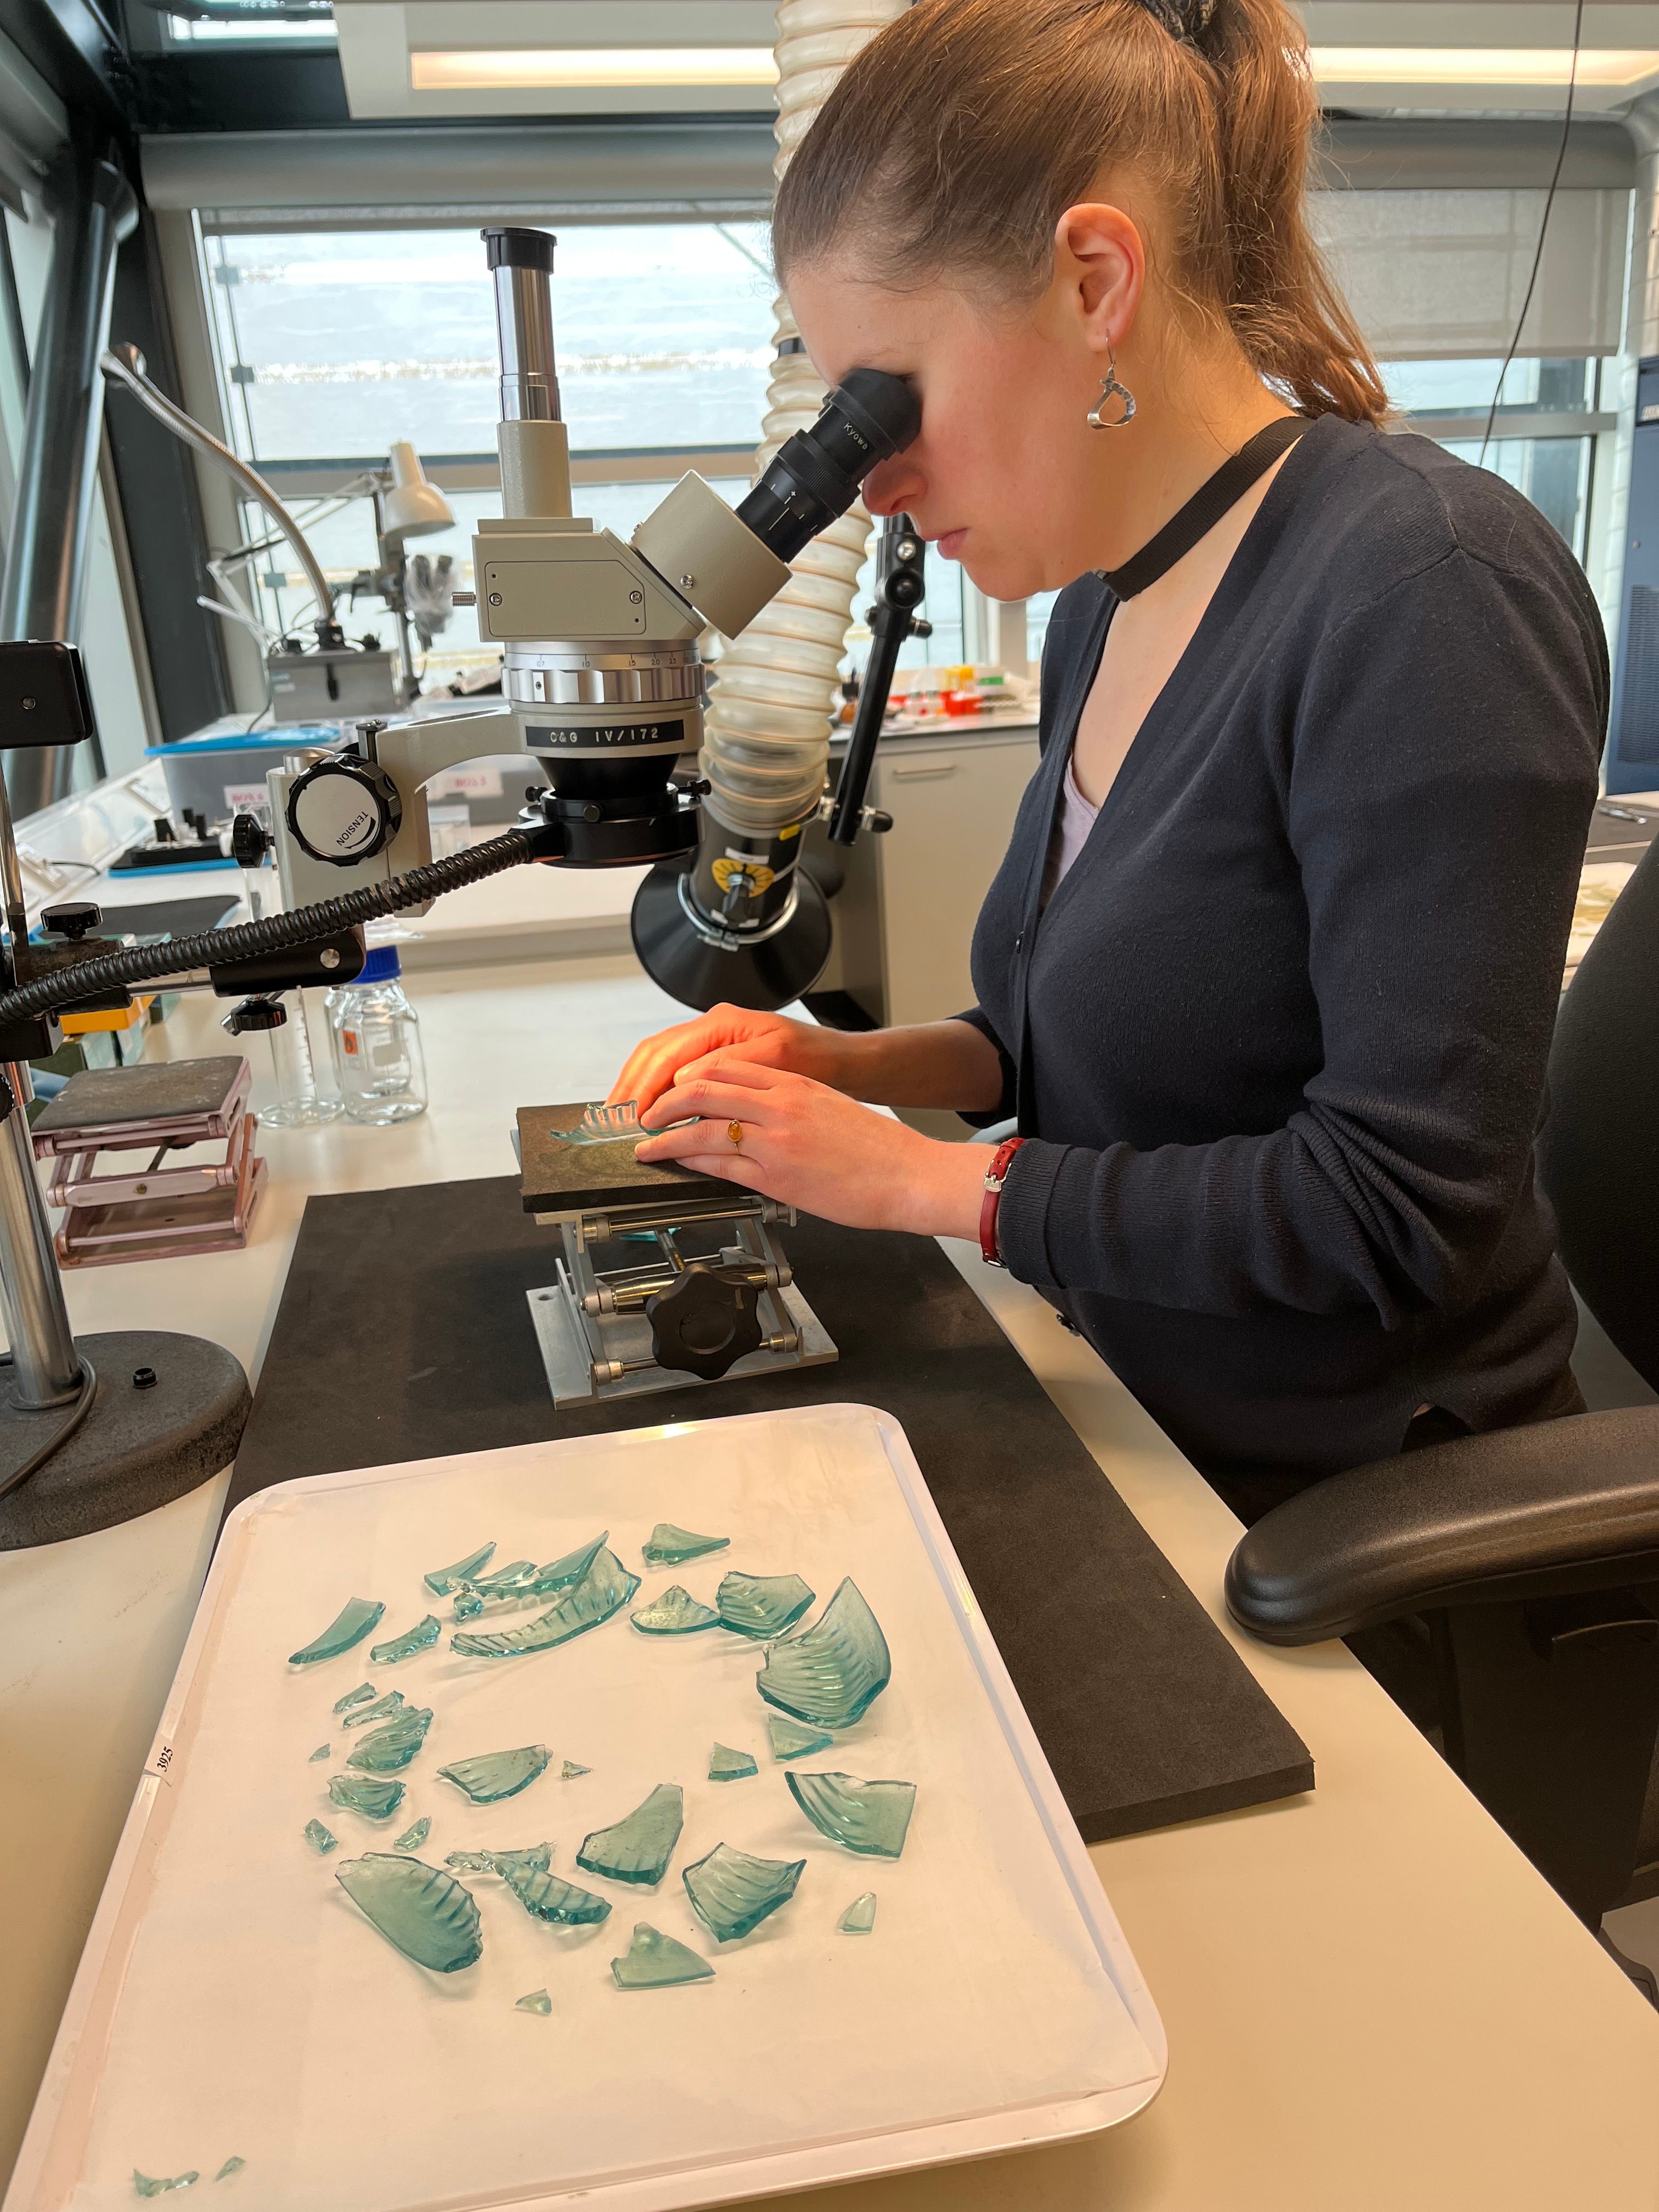 Claire Cuyaubère, a French expert in glass and ceramic conservation, worked to repair a Roman ribbed bowl from the first century.